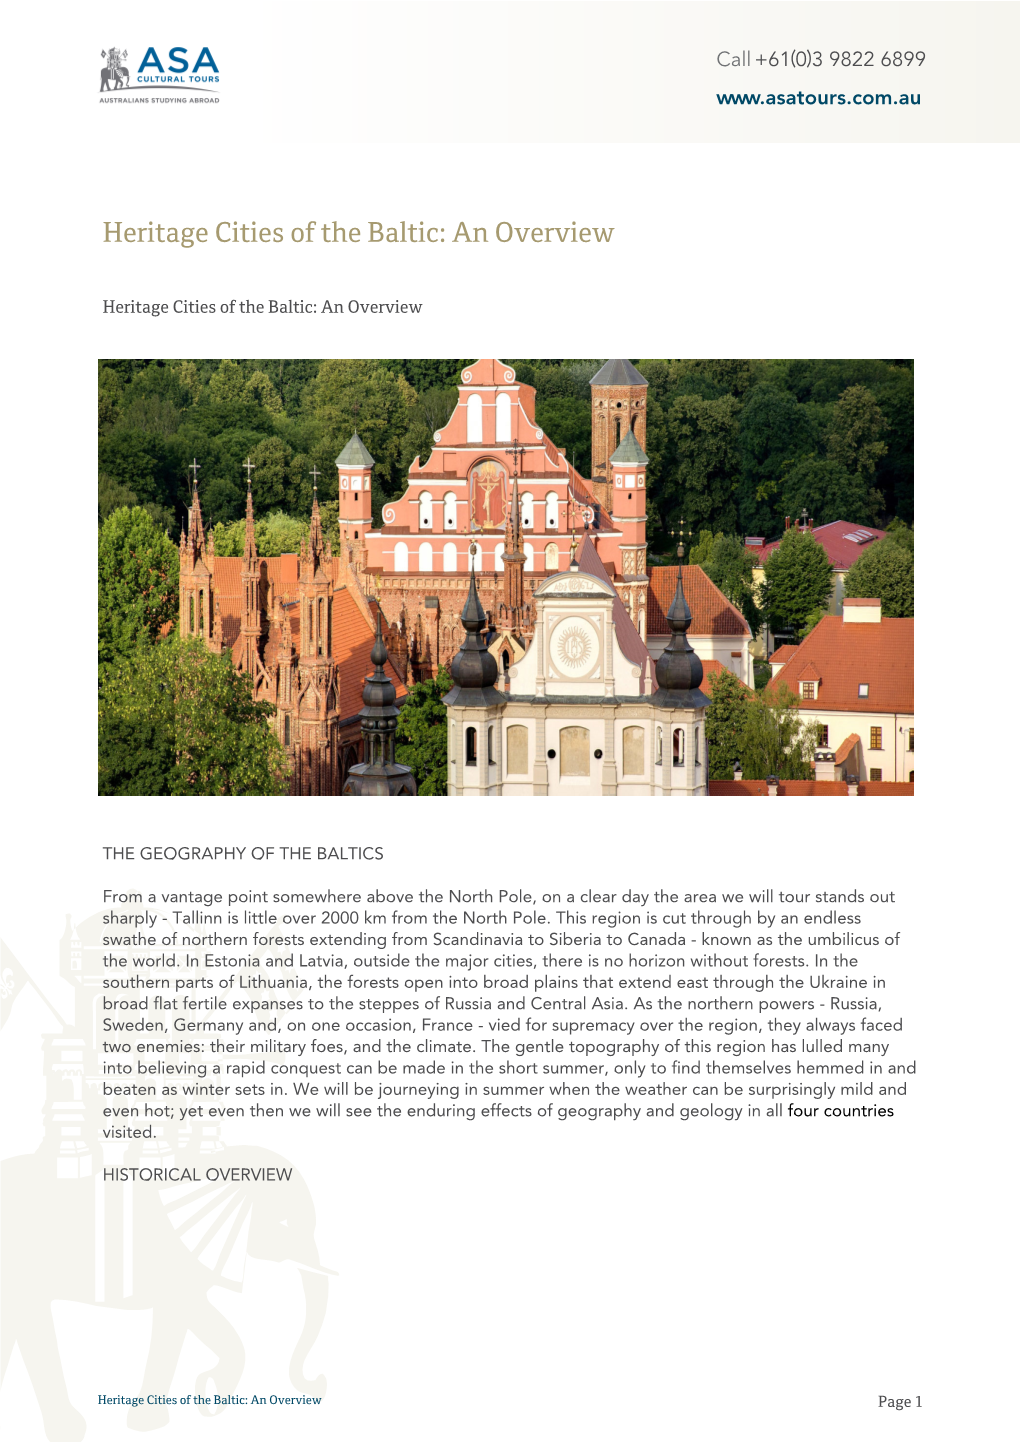 Heritage Cities of the Baltic: an Overview